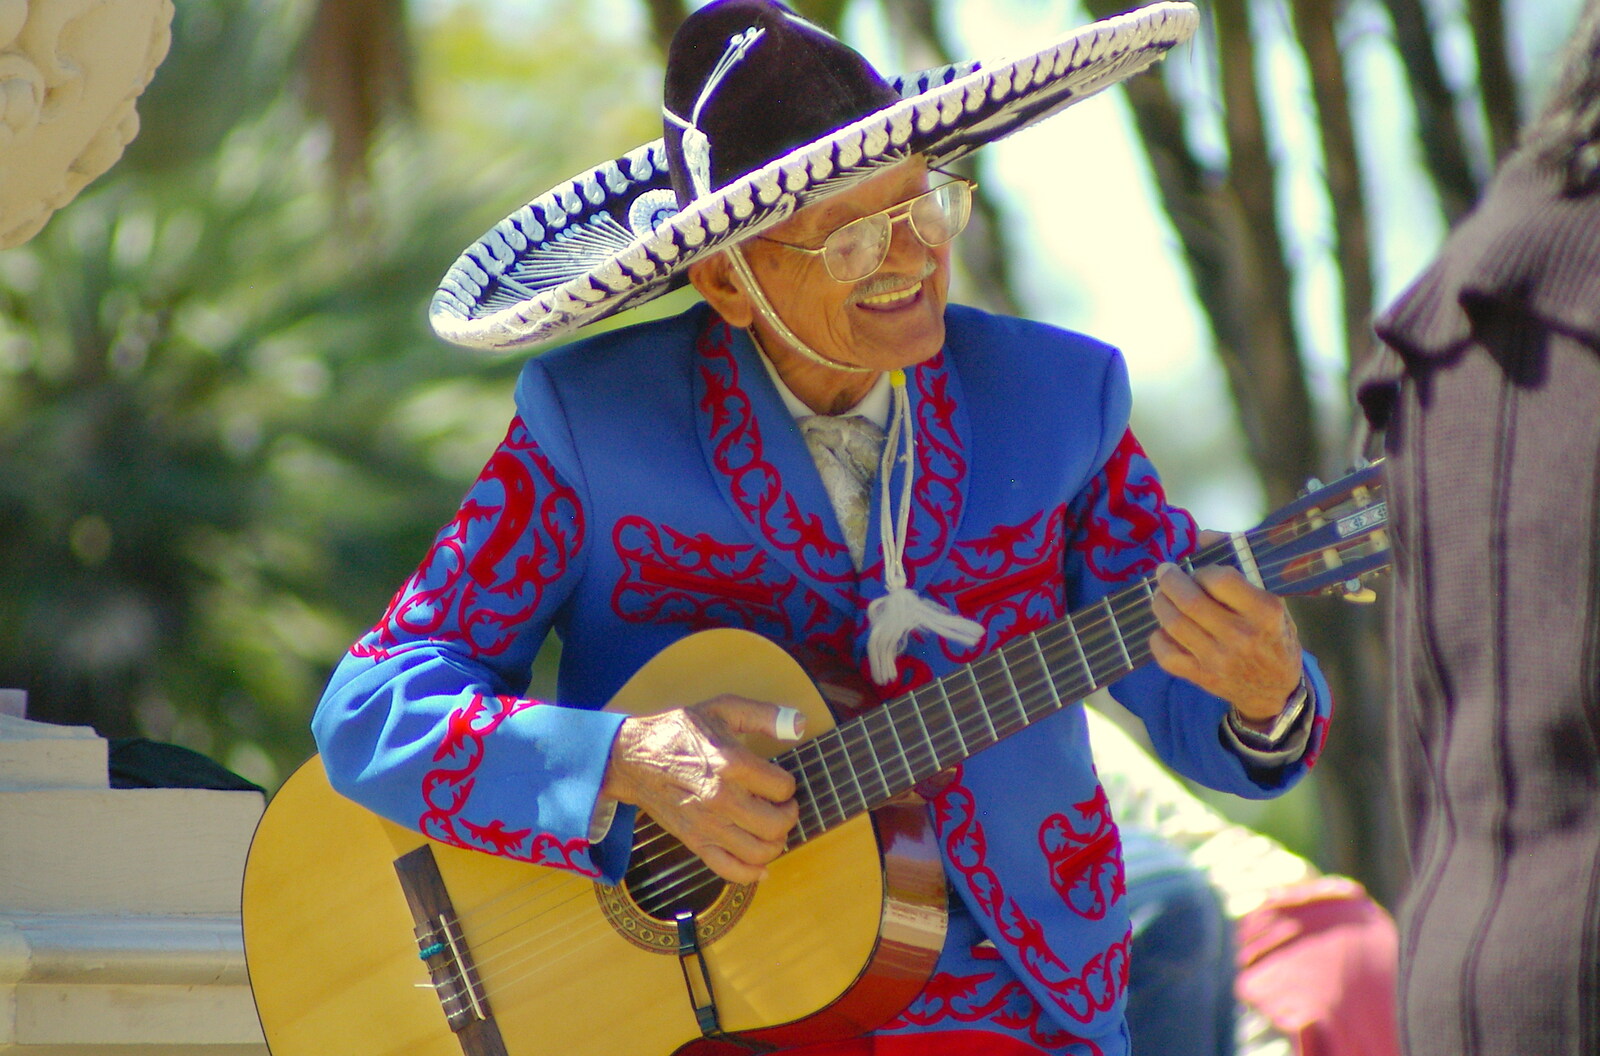 Scenes and People of Balboa Park, San Diego, California - 25th September 2005: An old Mexican guy sings version of 'Guantanamera'